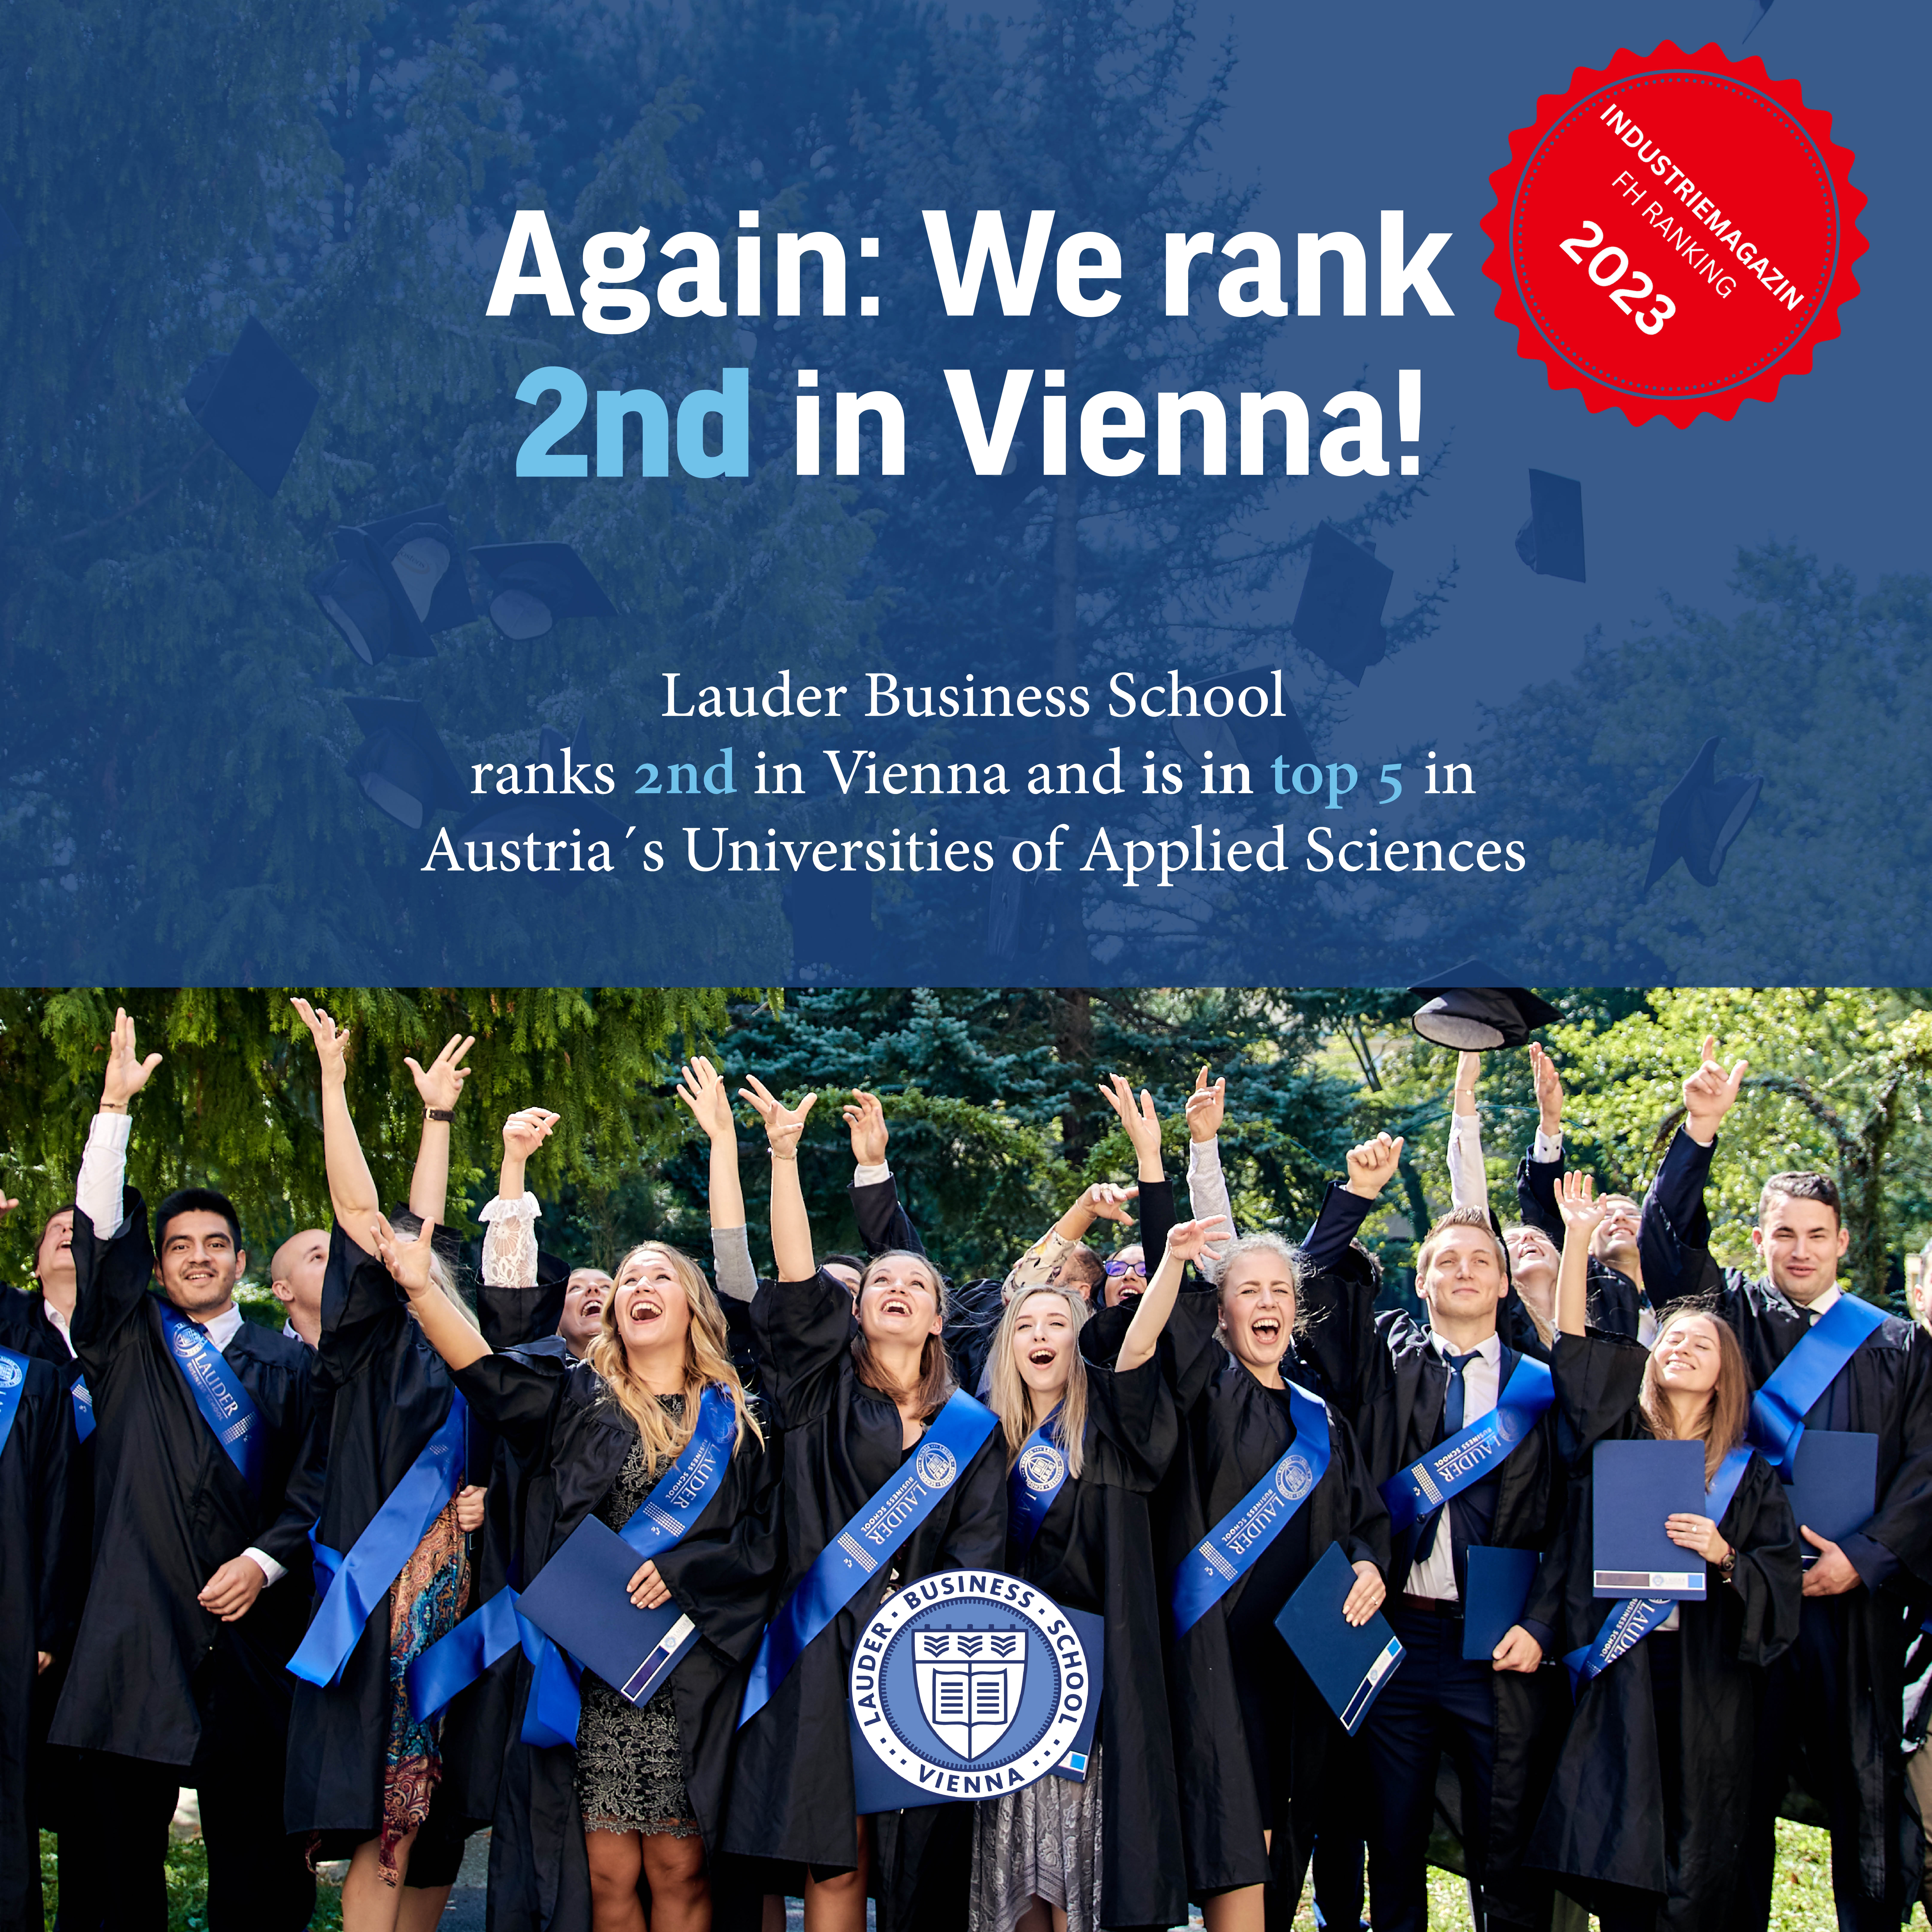 Again: Lauder Business School ranks second in Vienna’s and fourth in Austria´s Universities of Applied Sciences